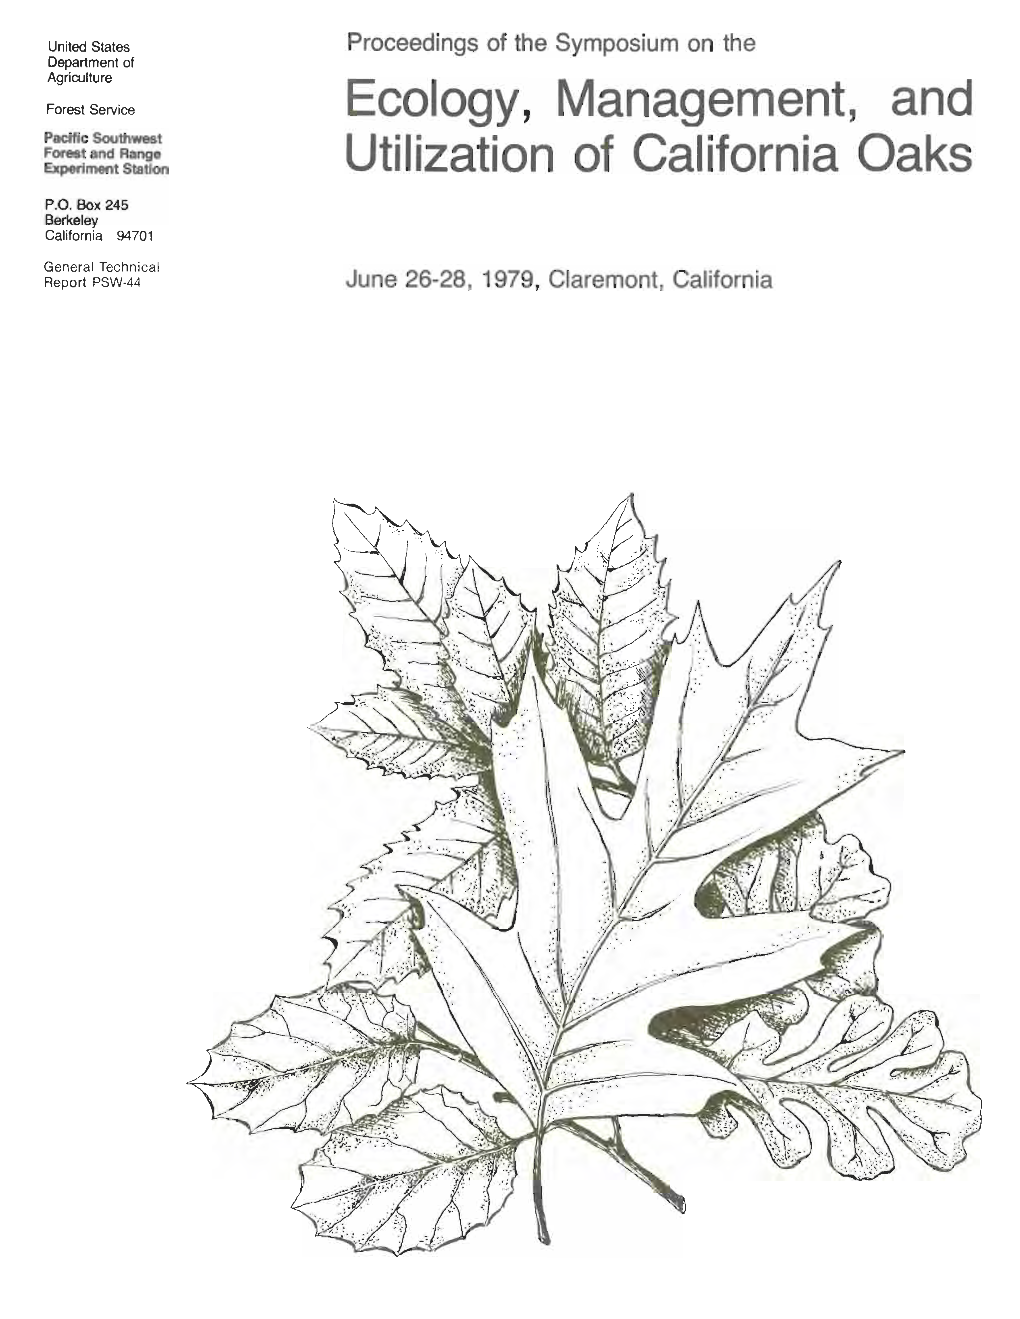 Proceedings of the Symposium on the Ecology, Management, and Utilization of California Oaks